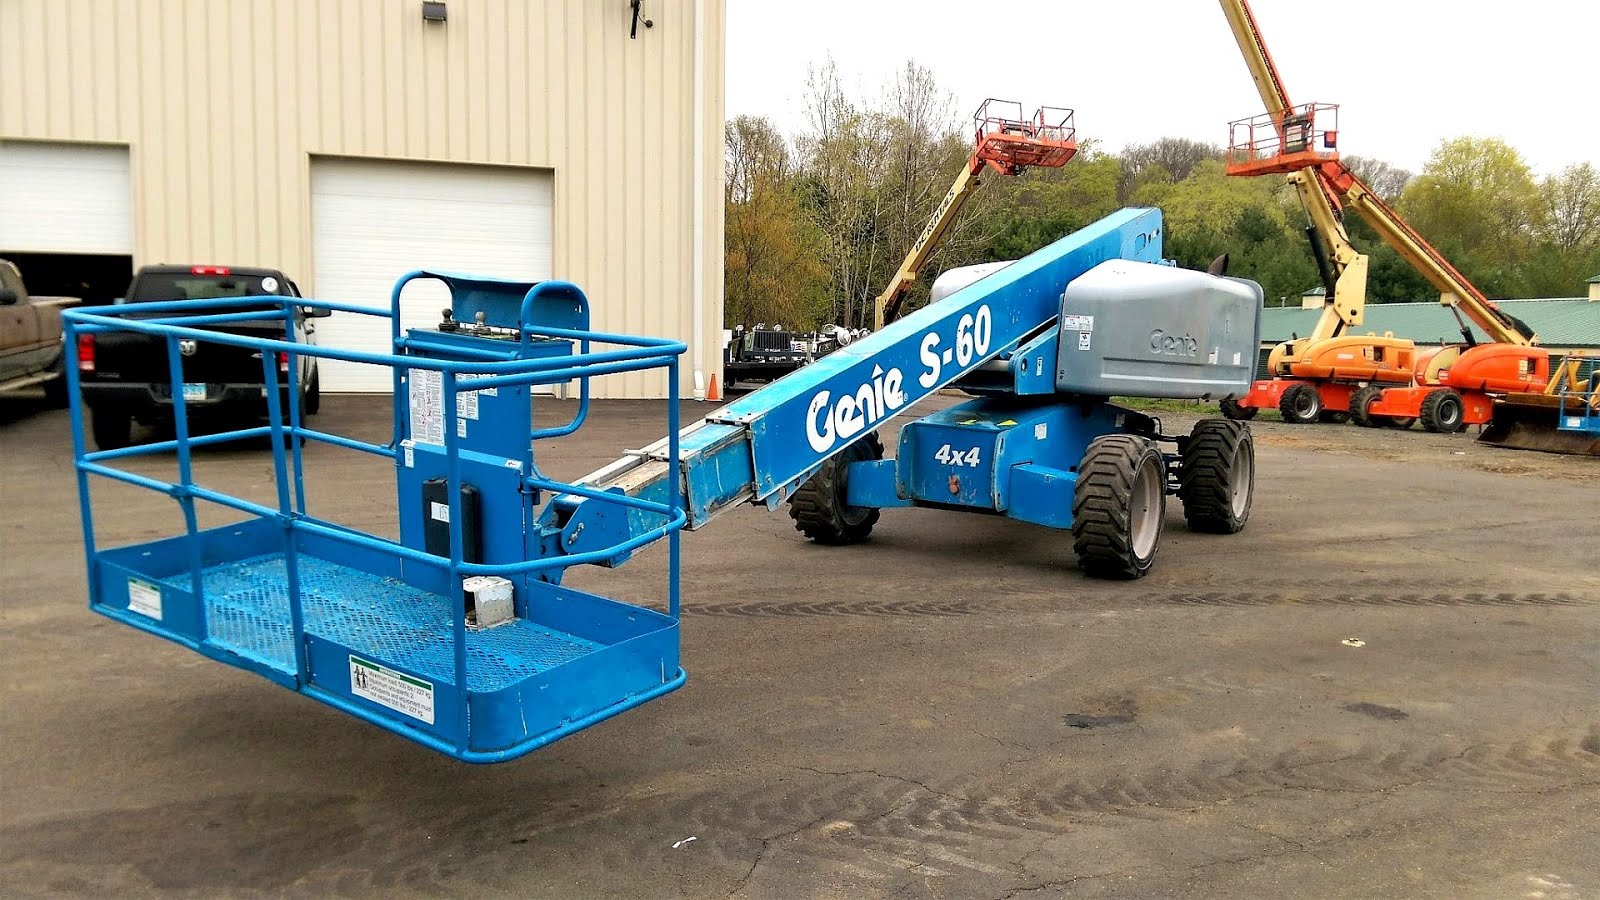 Used Genie Lifts - Lift Choices